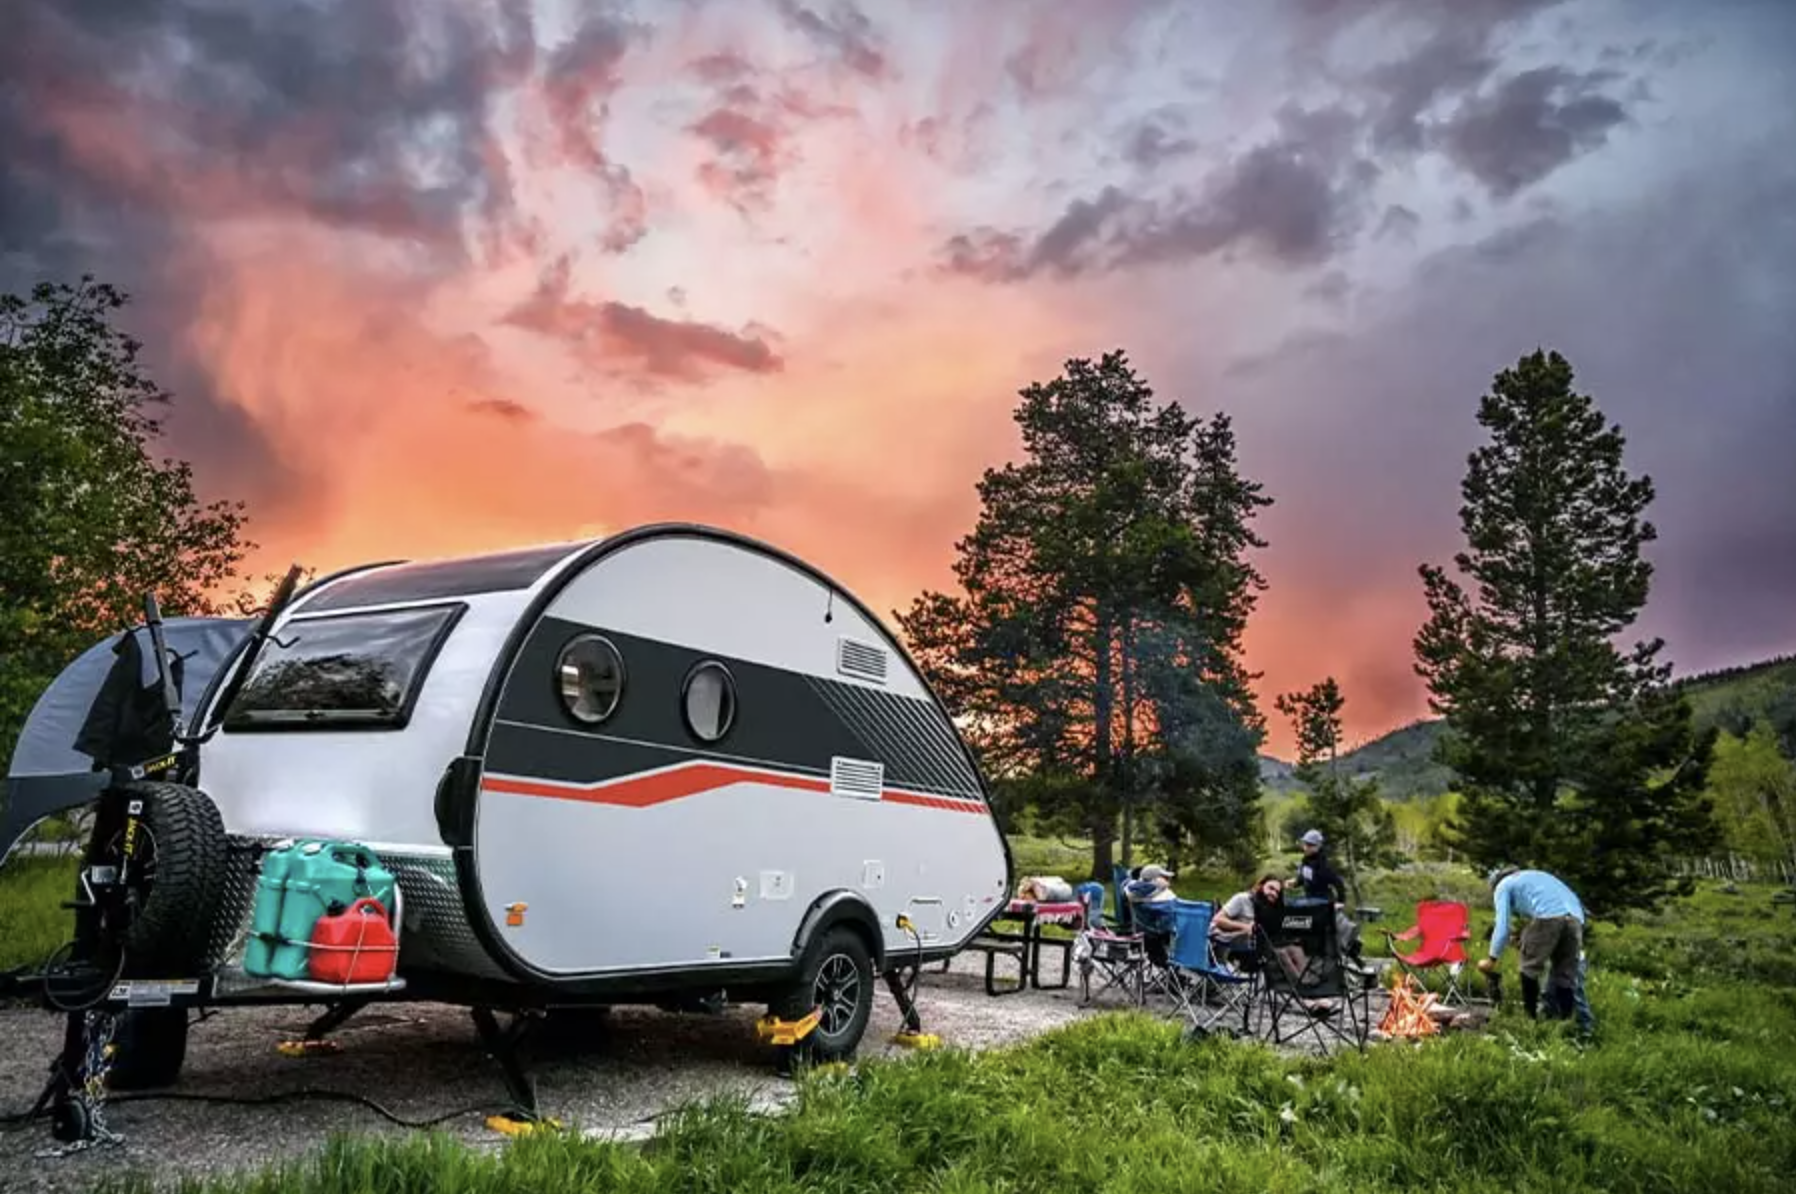 The Nucamp TAB 400 is one of the coolest small campers. This picture shows the teardrop trailer parked at a campsite in front of a vivid sunset.